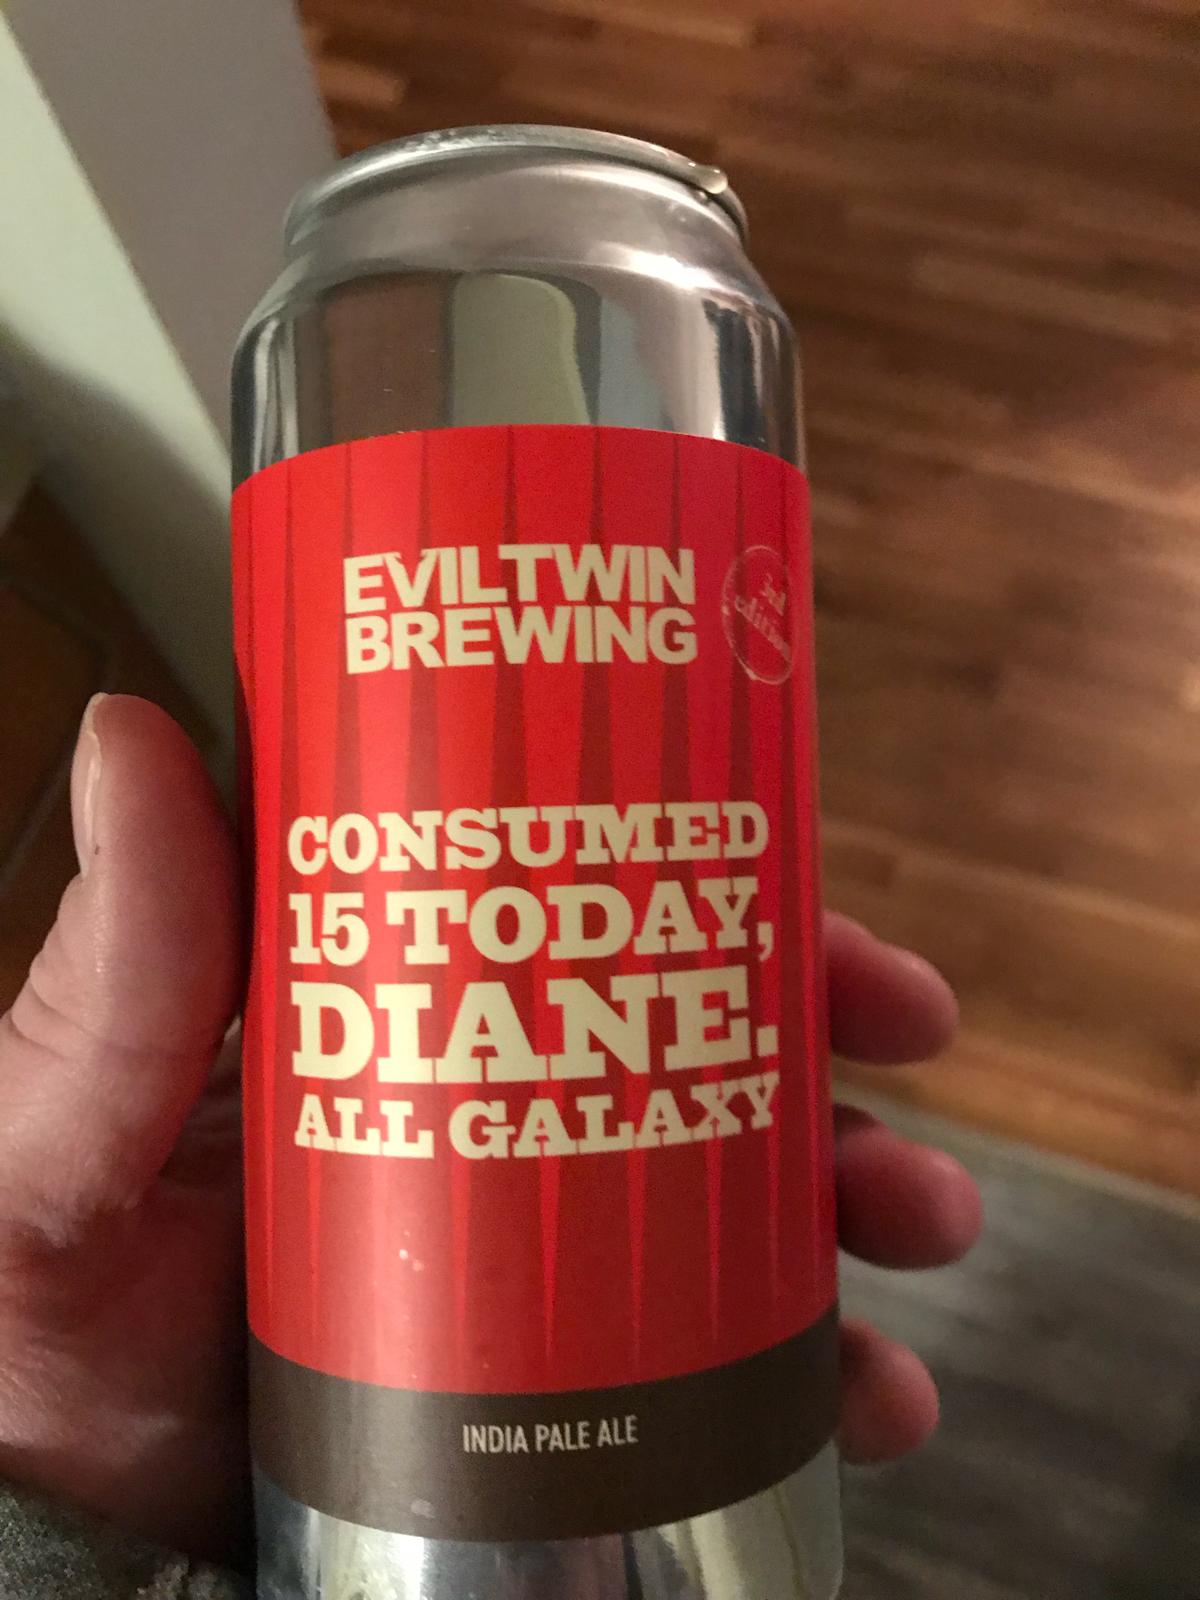 Consumed 15 Today, Diane. All Galaxy